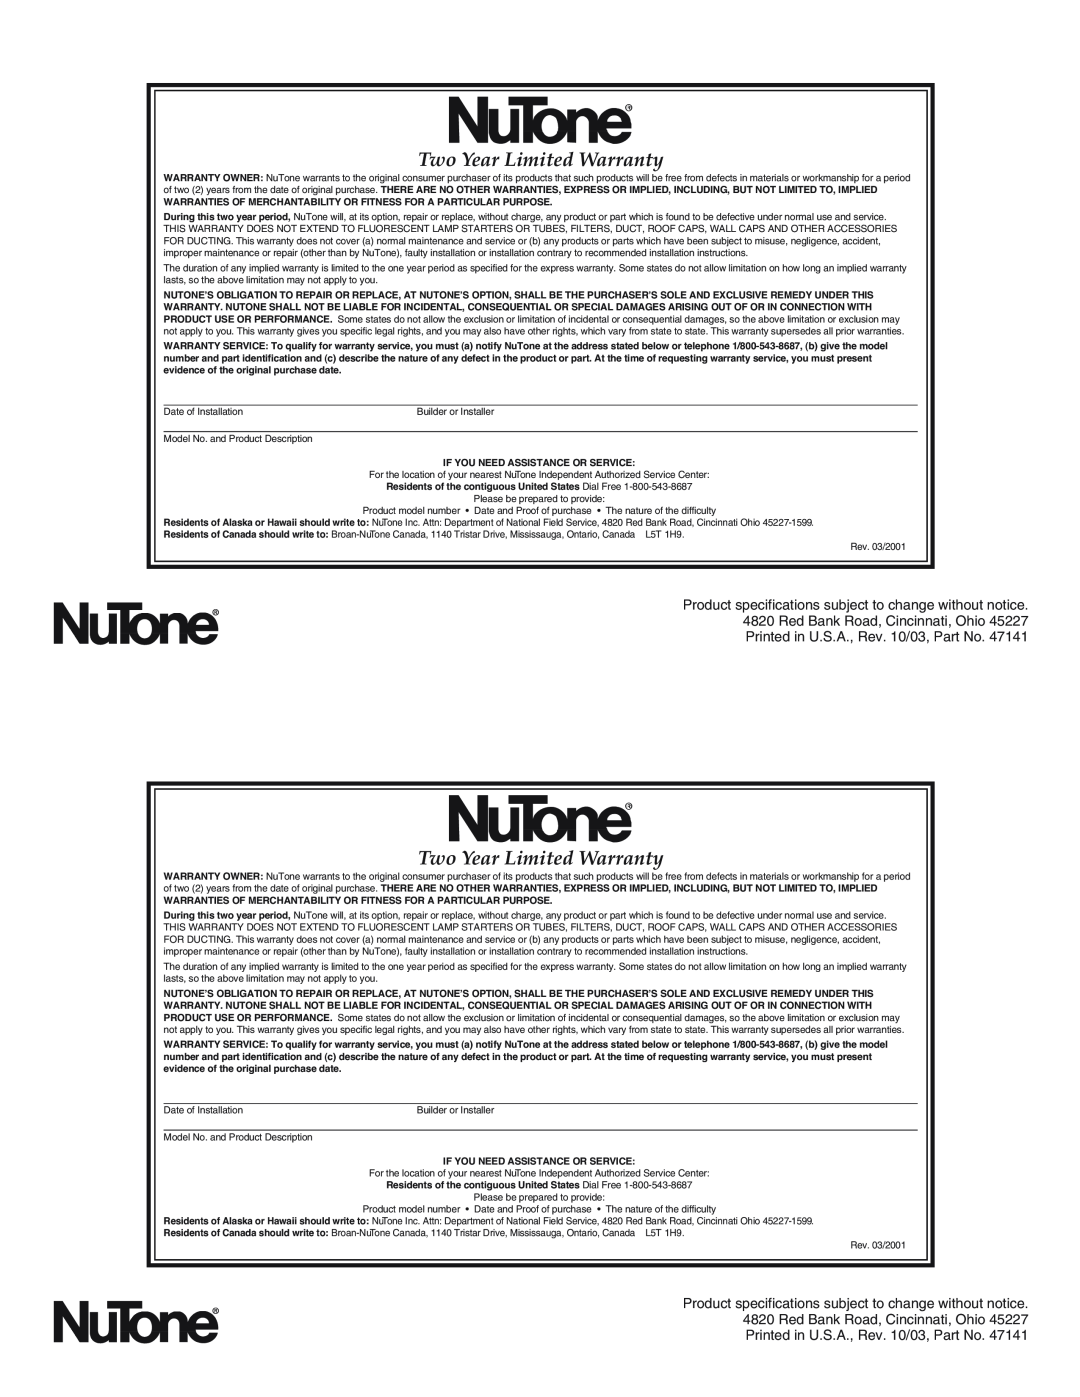 NuTone 467 installation instructions Two Year Limited Warranty 